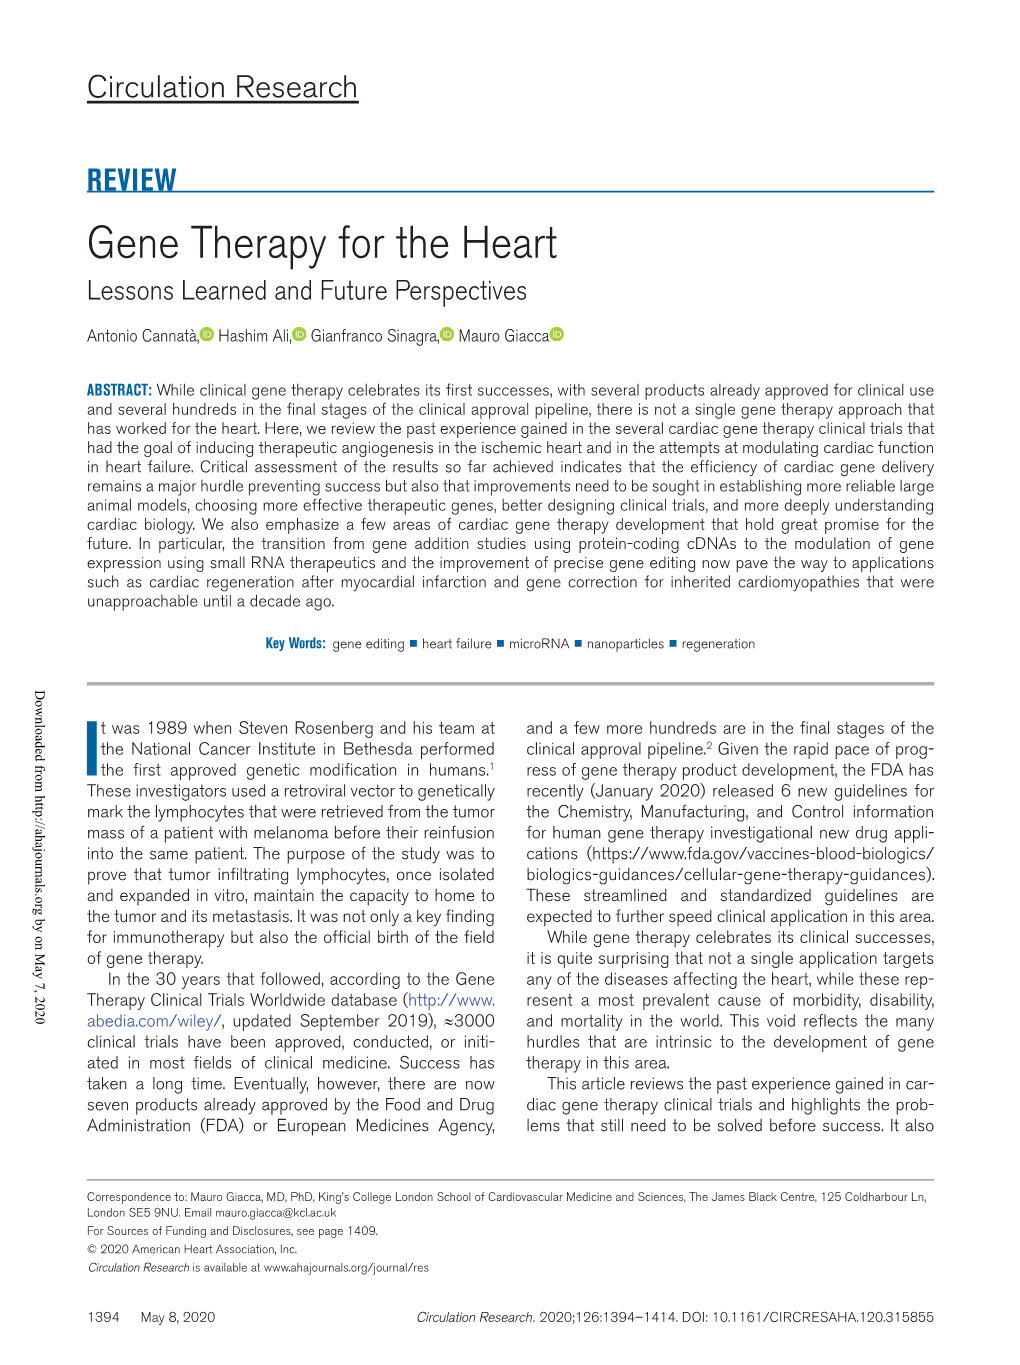 Gene Therapy for the Heart Lessons Learned and Future Perspectives